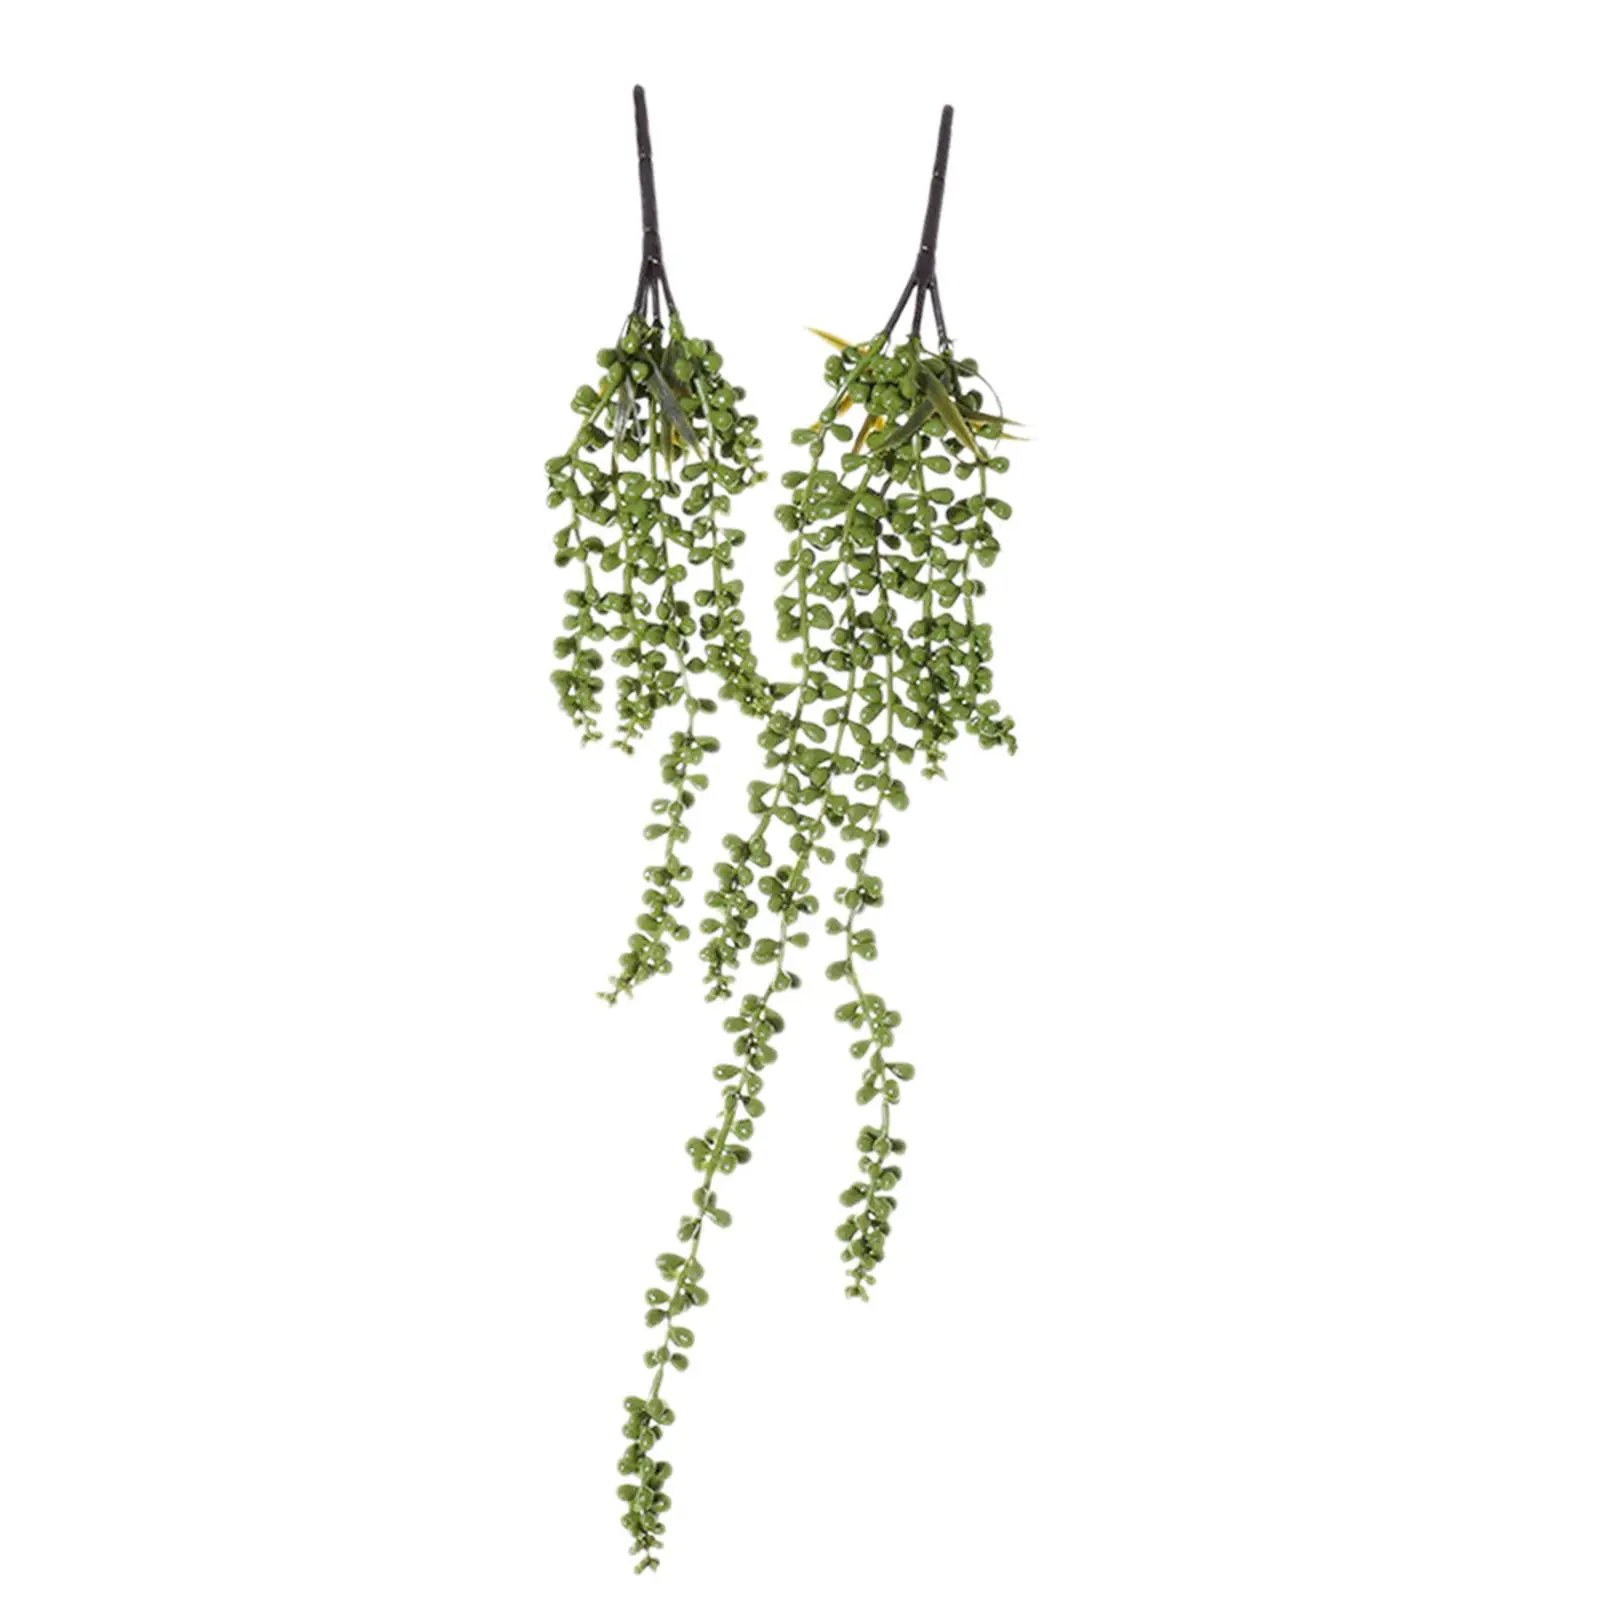 2x Artificial Succulents Hanging Plants Wall Home Garden Decor Green String of Pearls Plant Hanging Ornament for Office Garden